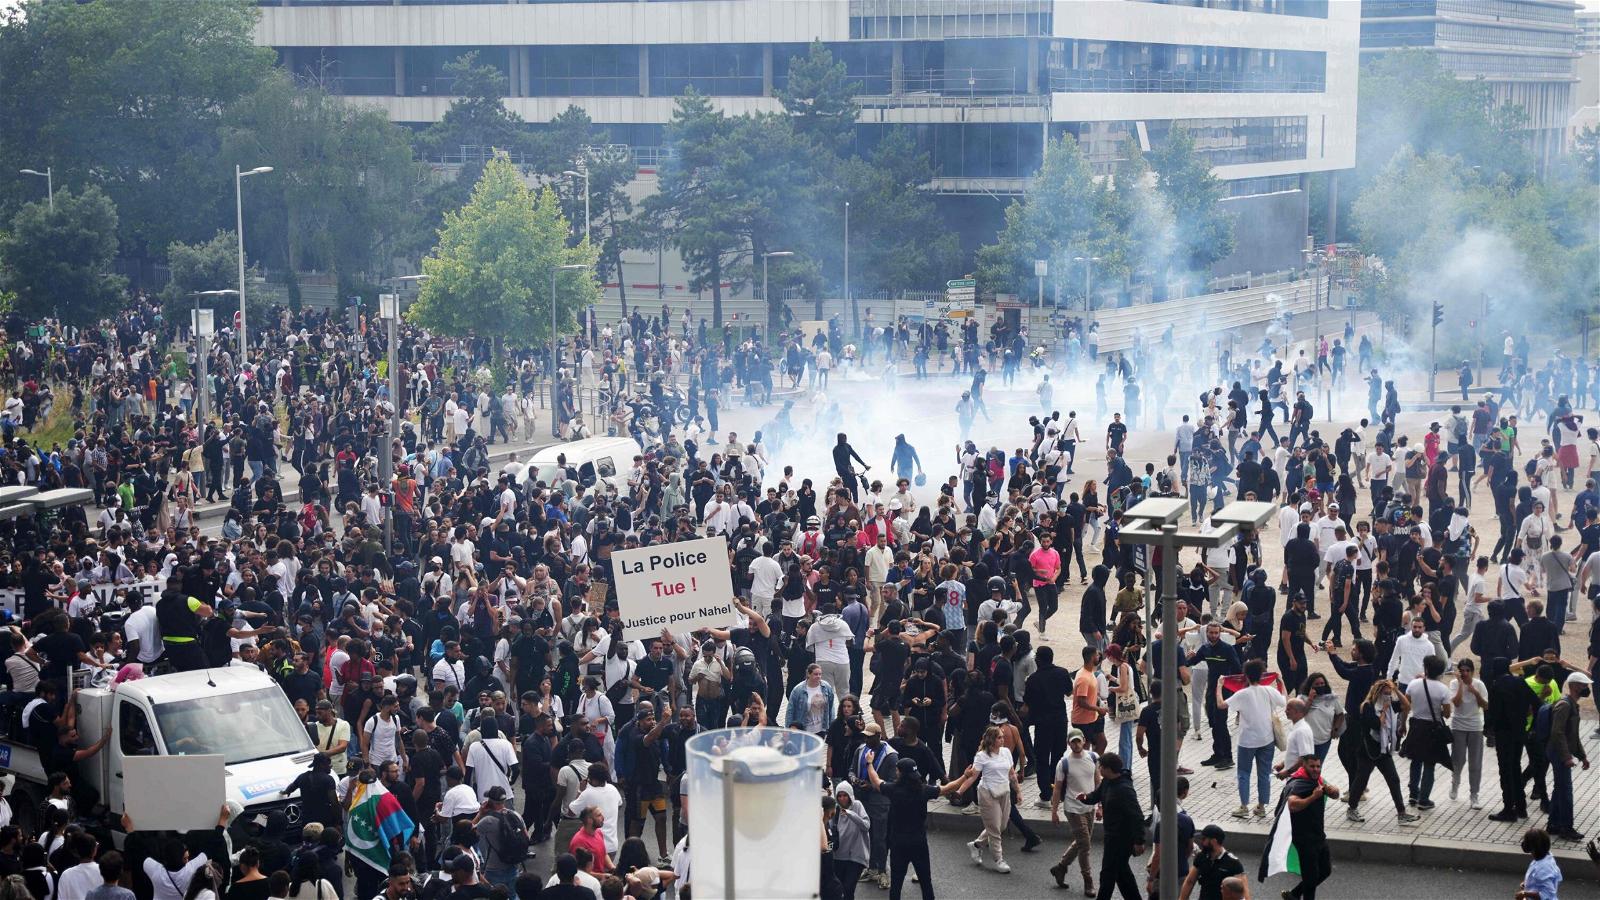 France protesters defy bans to rally against police violence - Vanguard ...